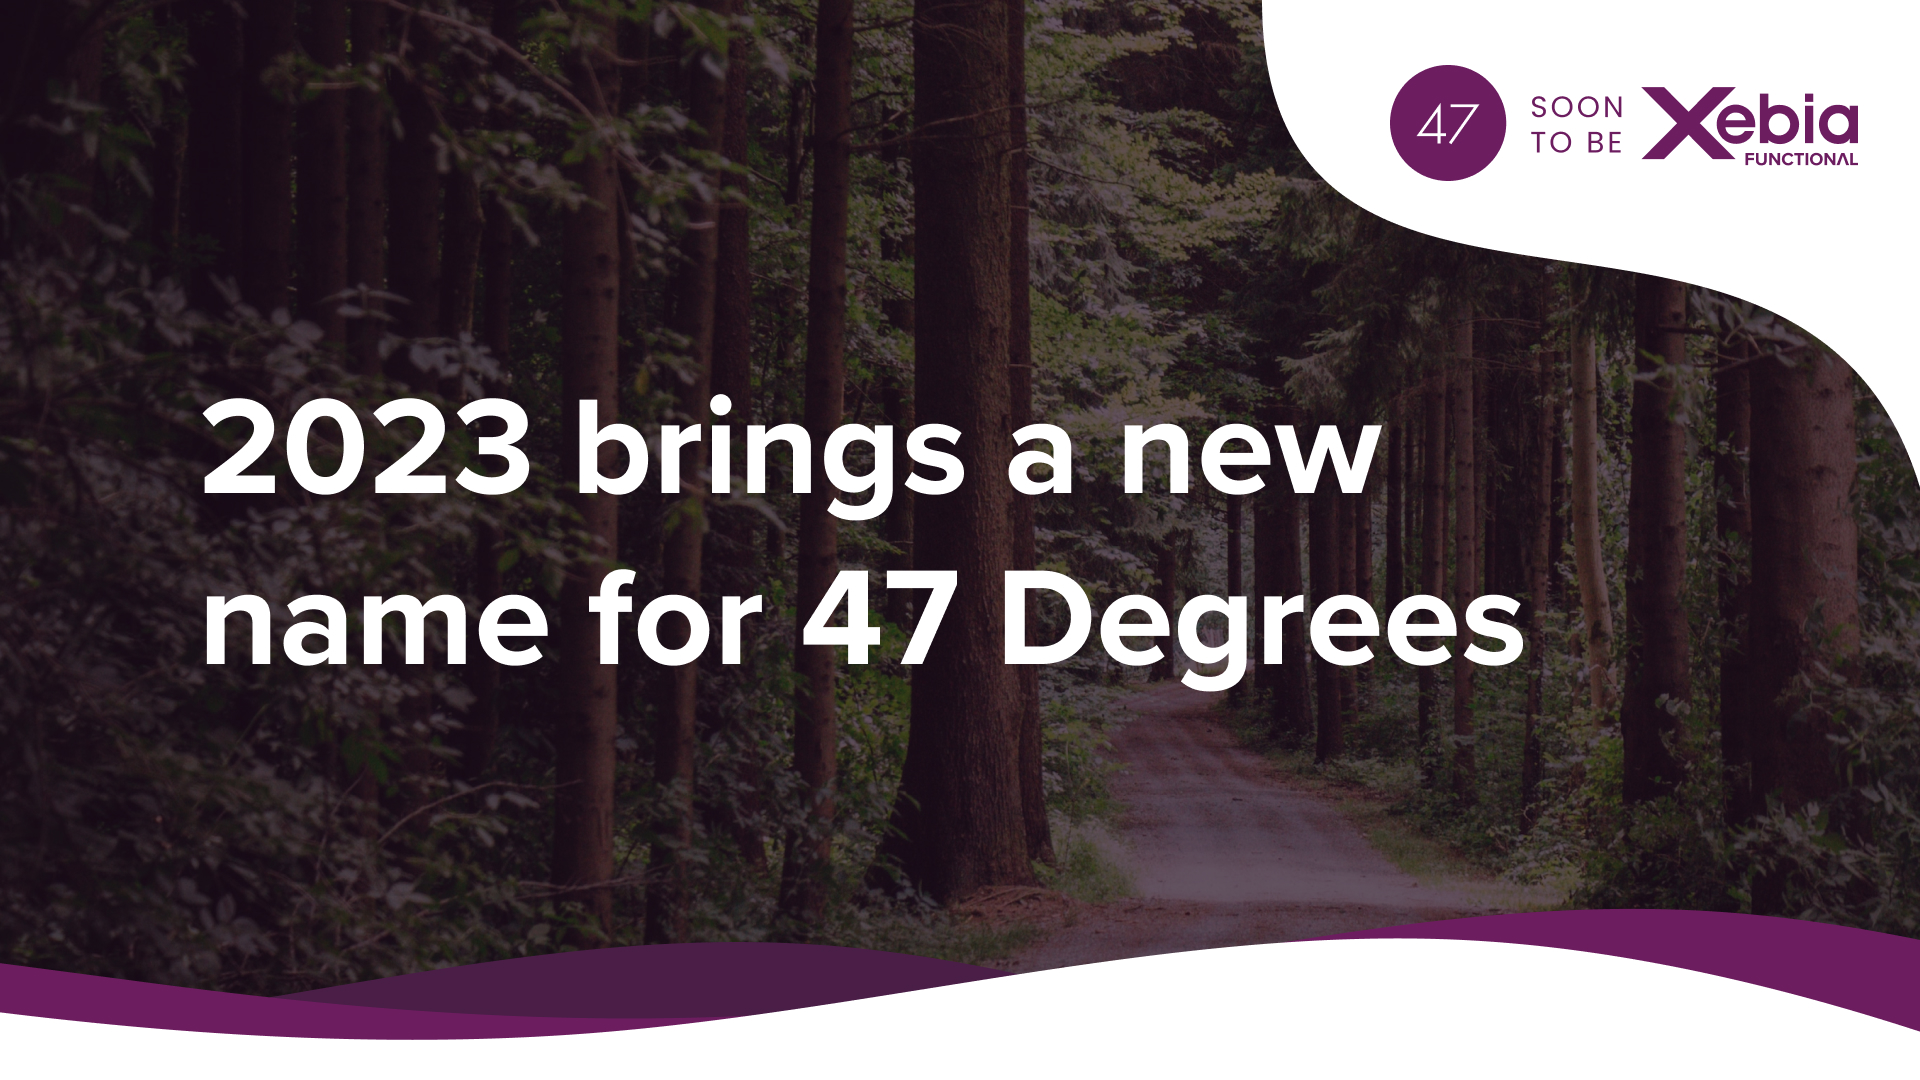 2023 brings a new name for 47 Degrees